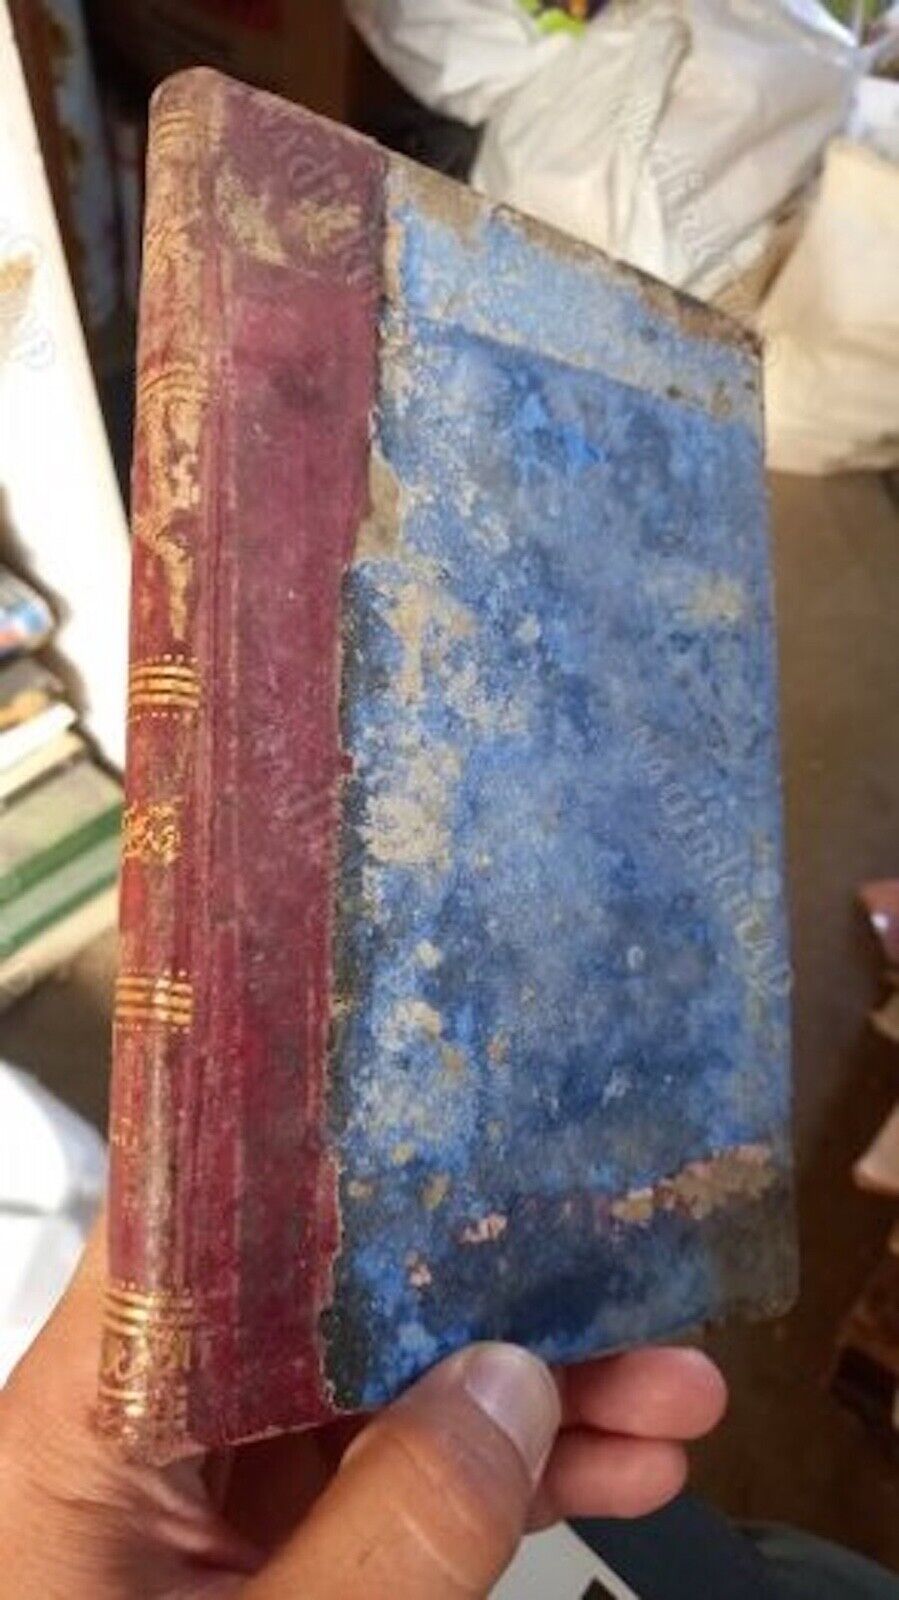 ANTIQUE GREEK BOOK 100+ years old  1882